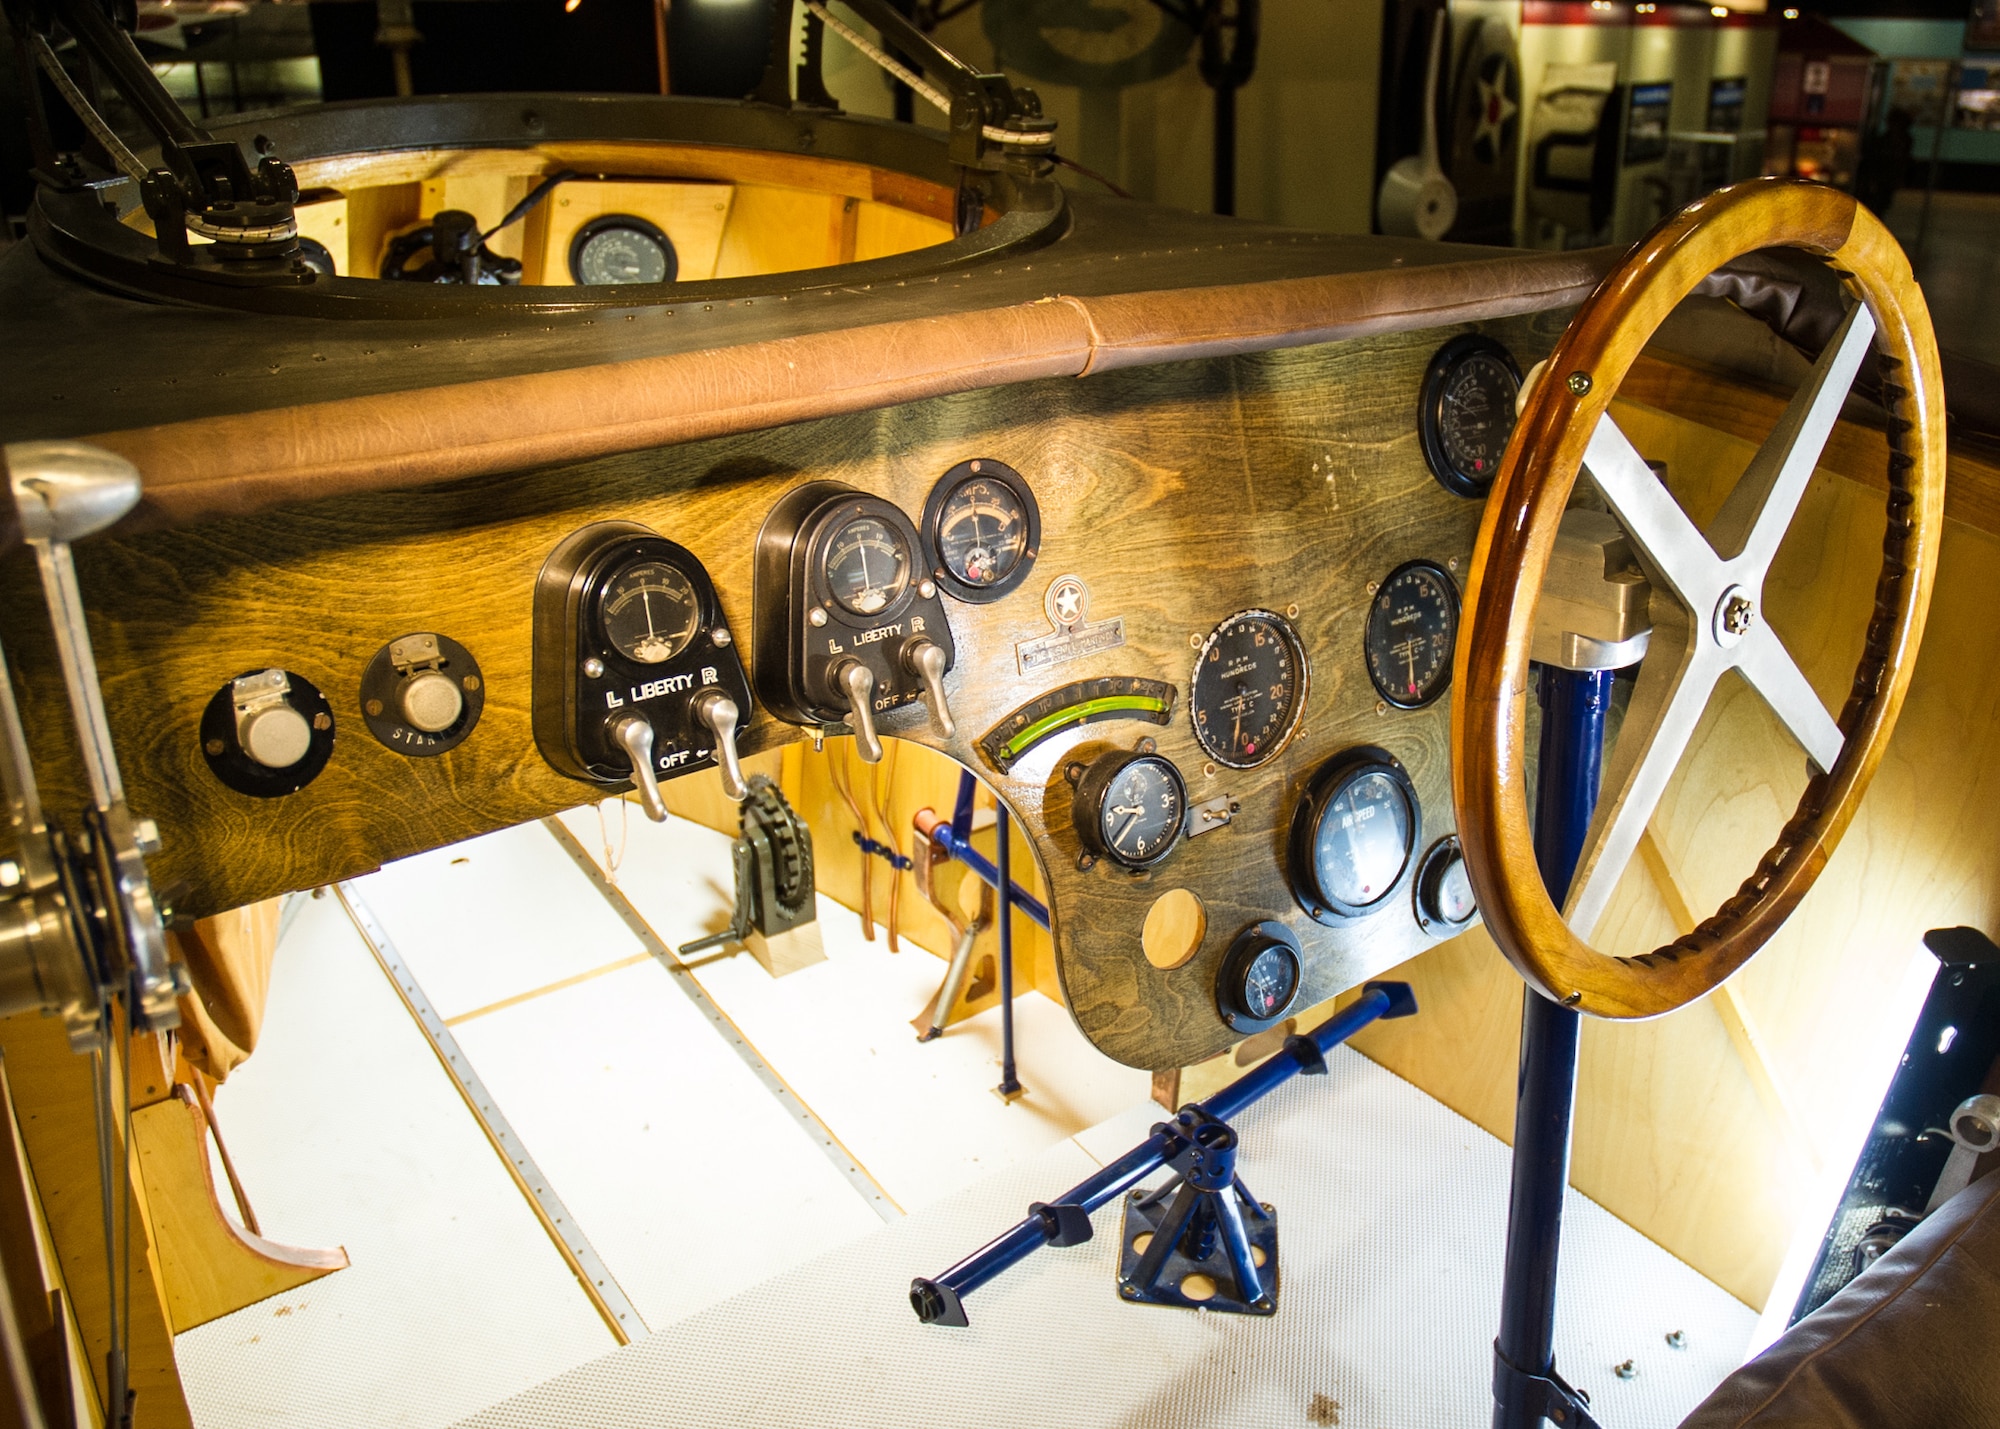 Martin MB-2 cockpit in the Early Years Gallery at the National Museum of the United States Air Force. (U.S. Air Force photo)